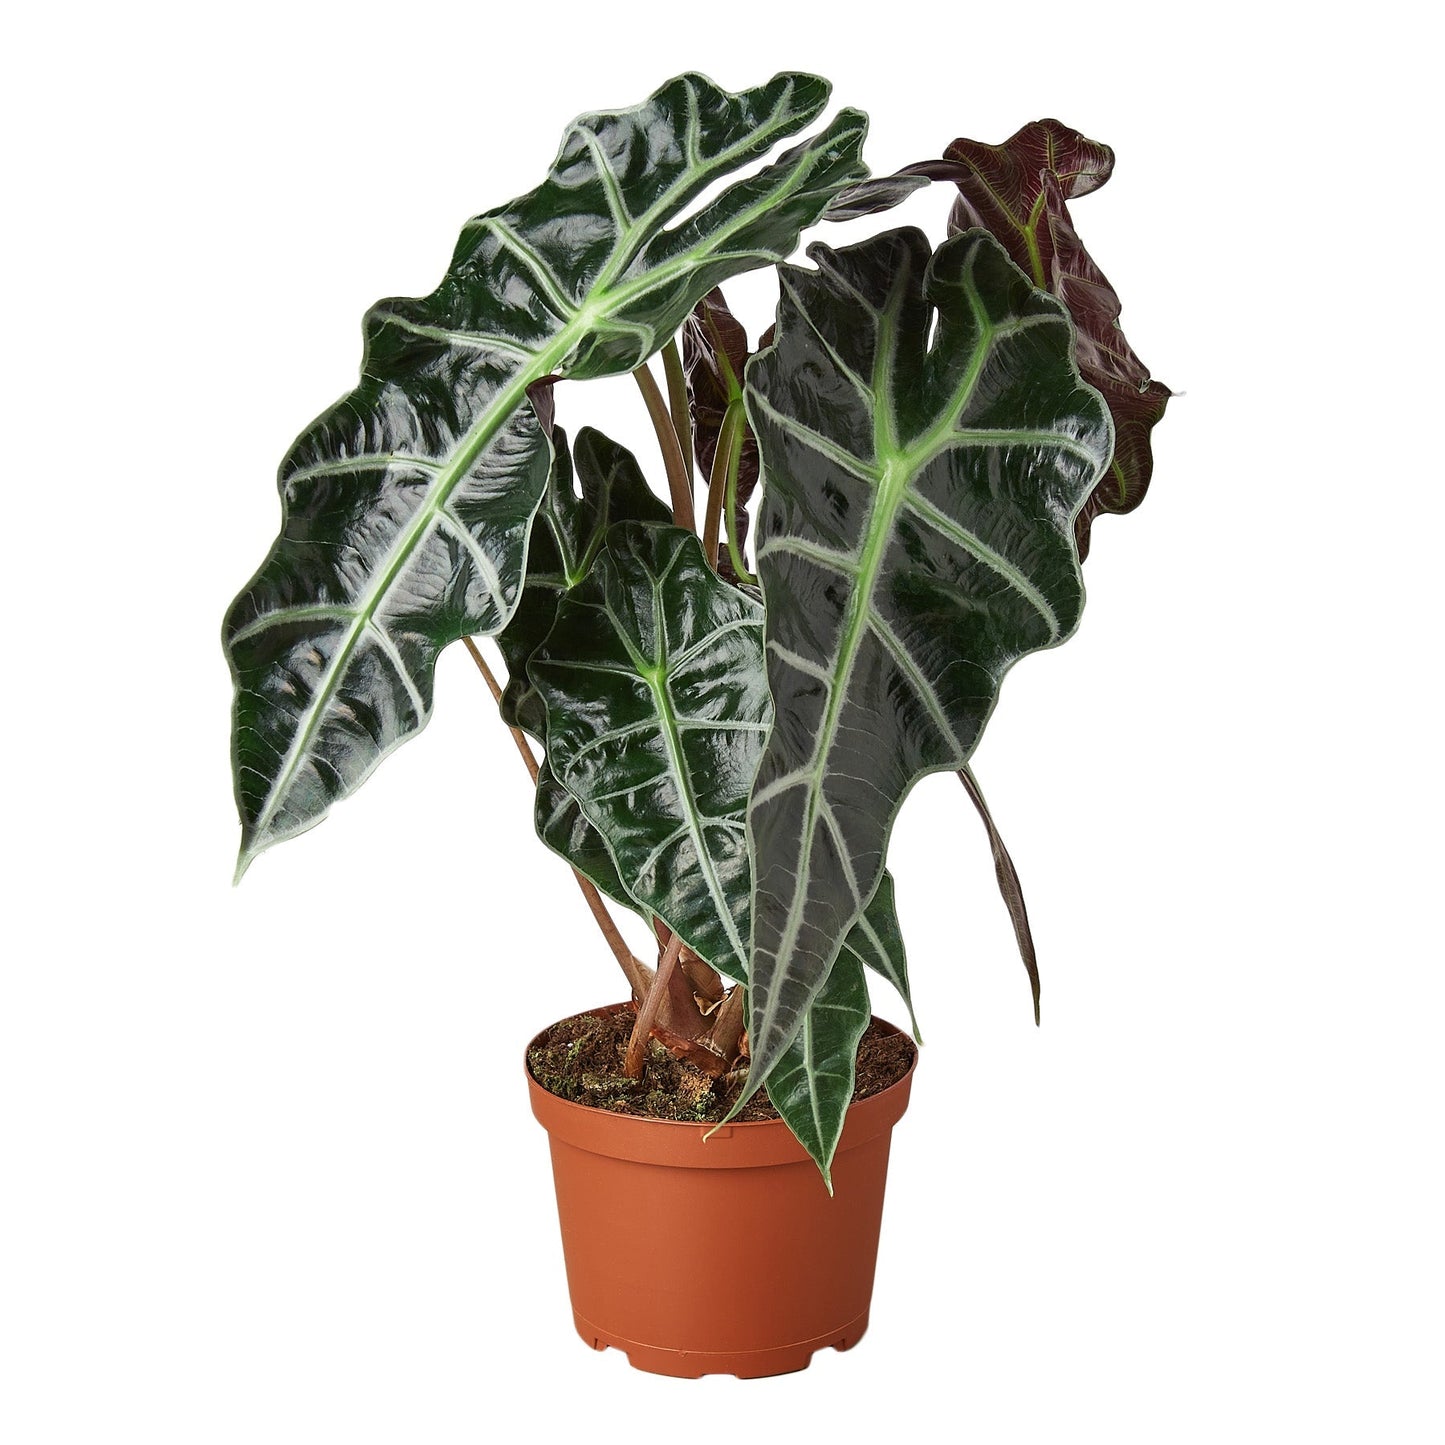 Alocasia Polly 'African Mask' - 4" Pot - NURSERY POT ONLY